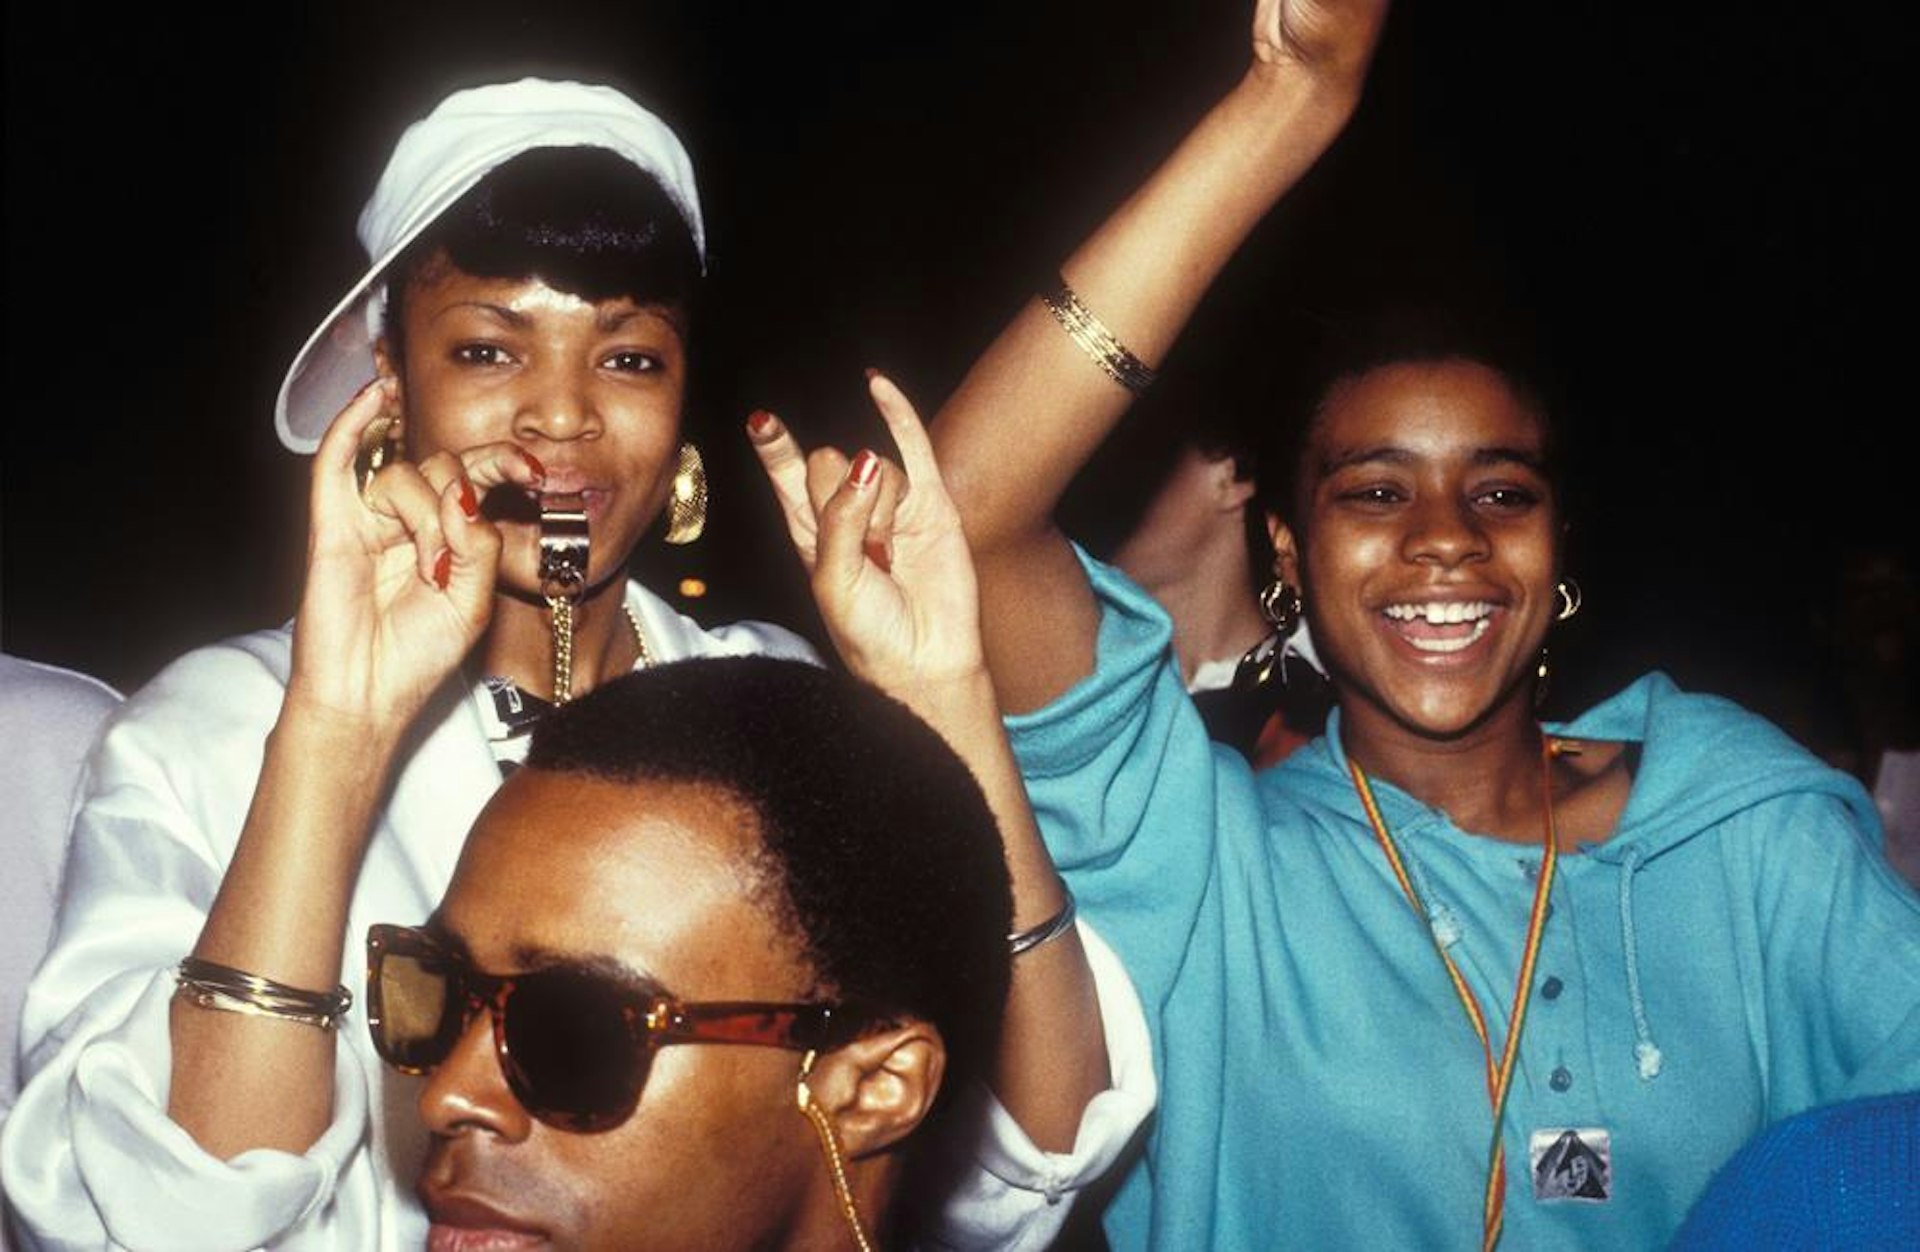 In Pictures: 30 years of raves, clubs and parties in the UK